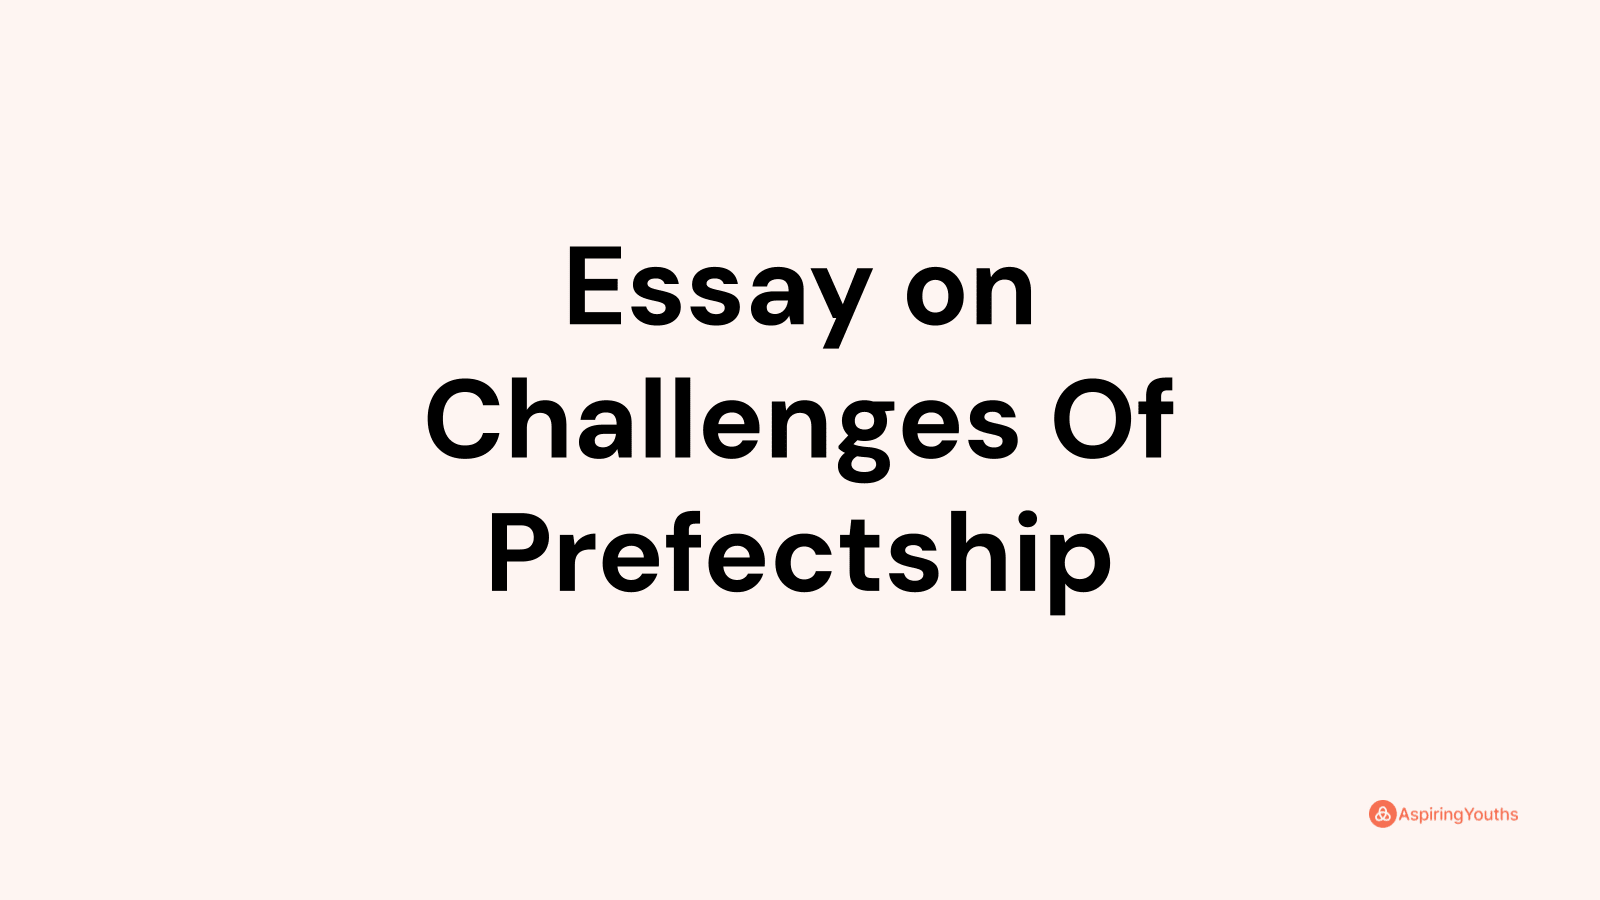 write a speech on the topic challenges of prefectship